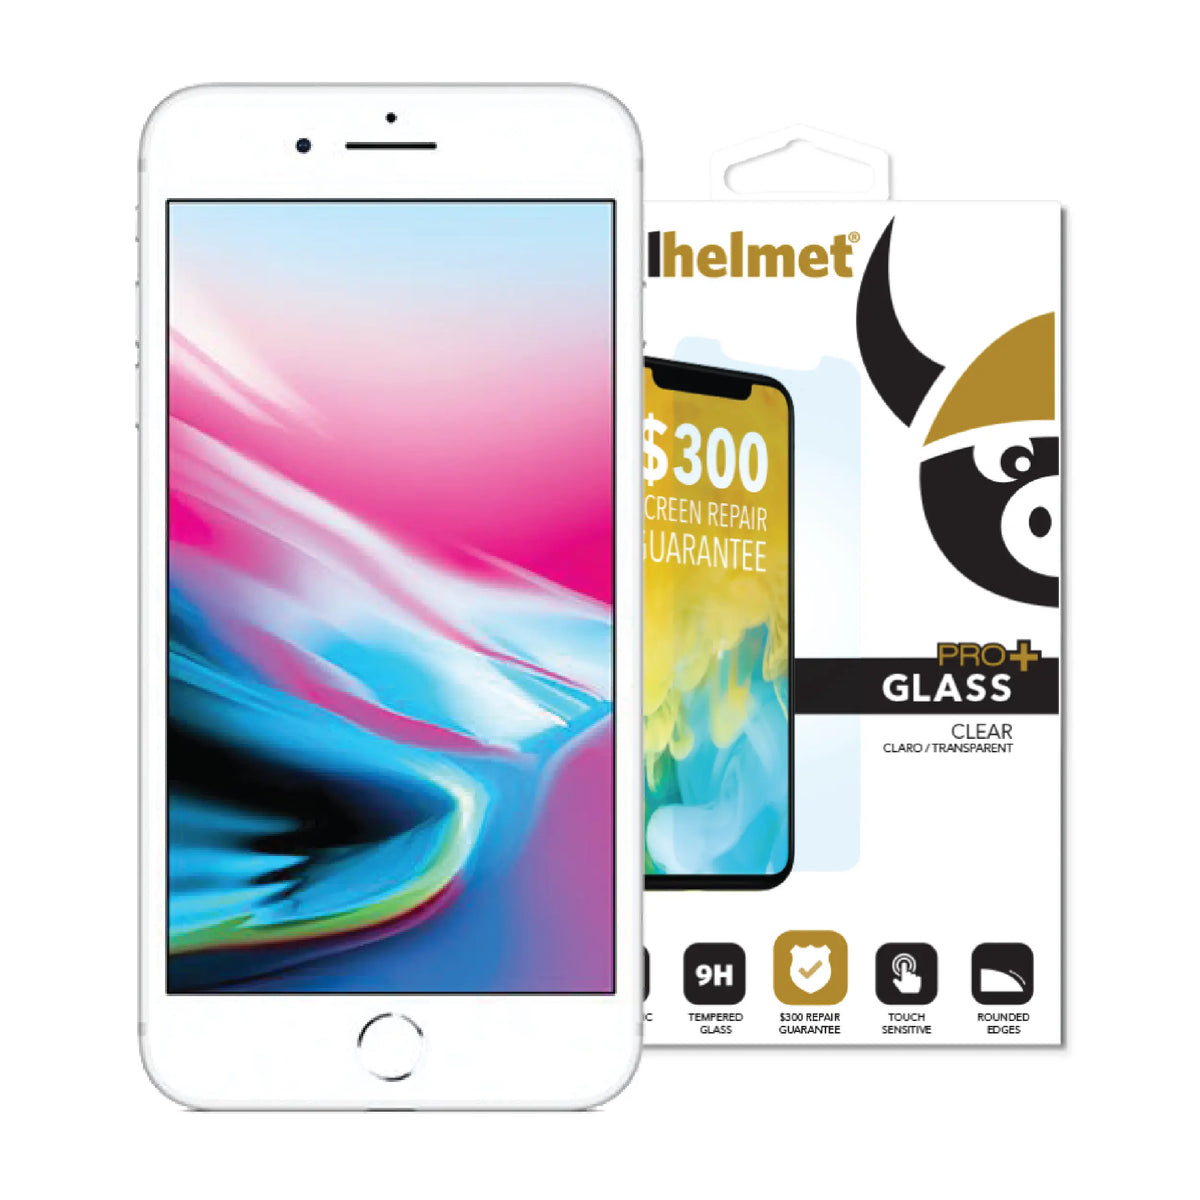 cellhelmet Tempered Glass Screen Protector for iPhone 8 Plus with Insurance